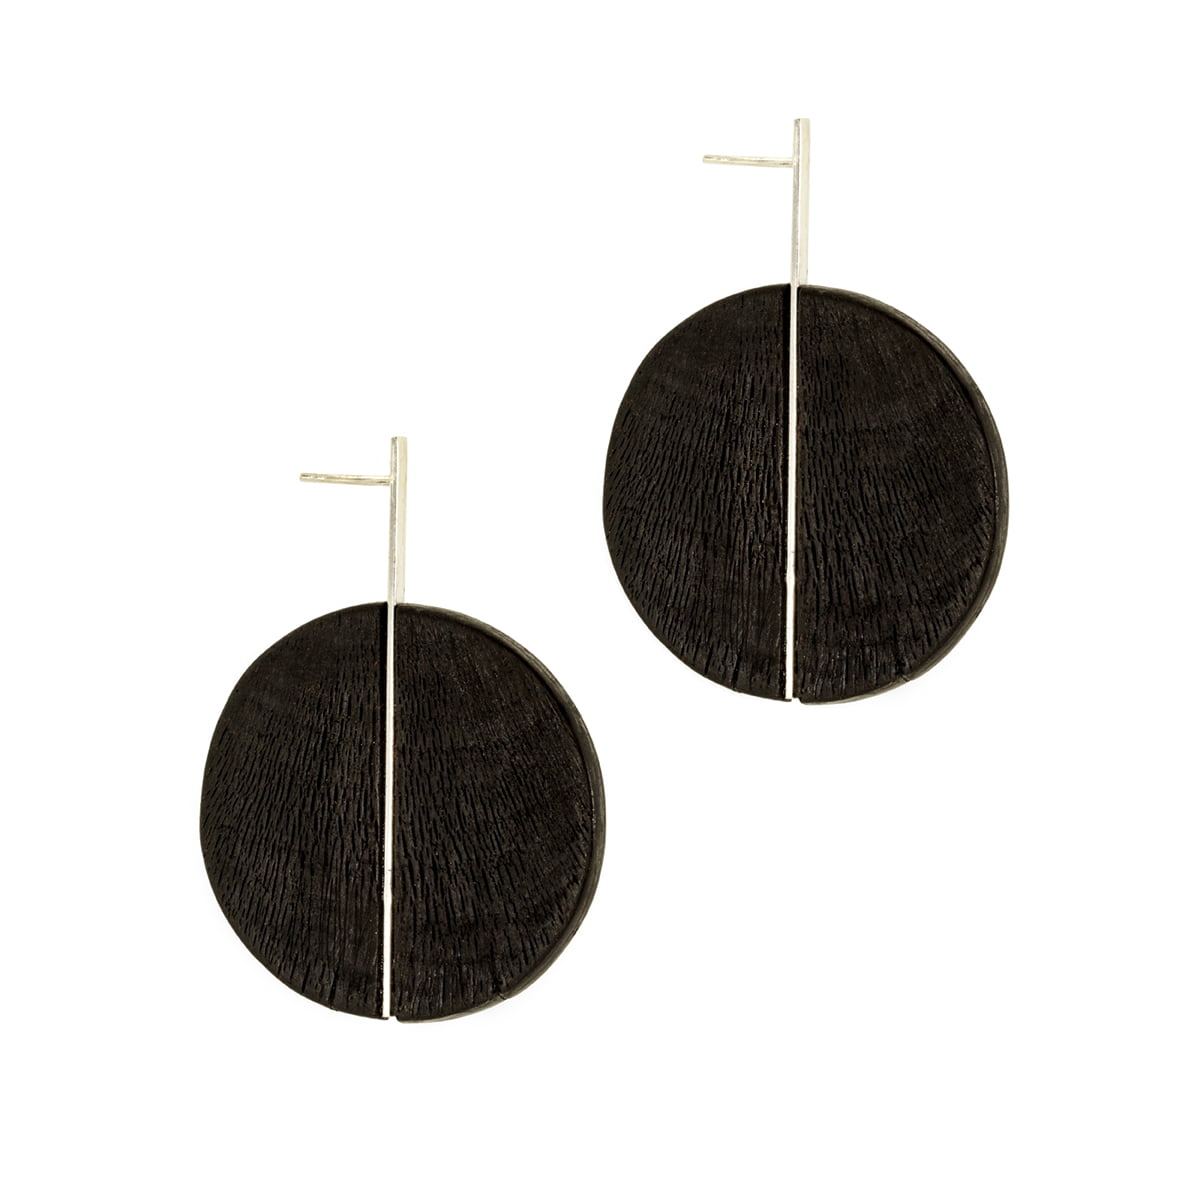 Duality earrings from the Quantum collection, handcrafted by Julie Bégin using pure sterling silver and hand charred wood.